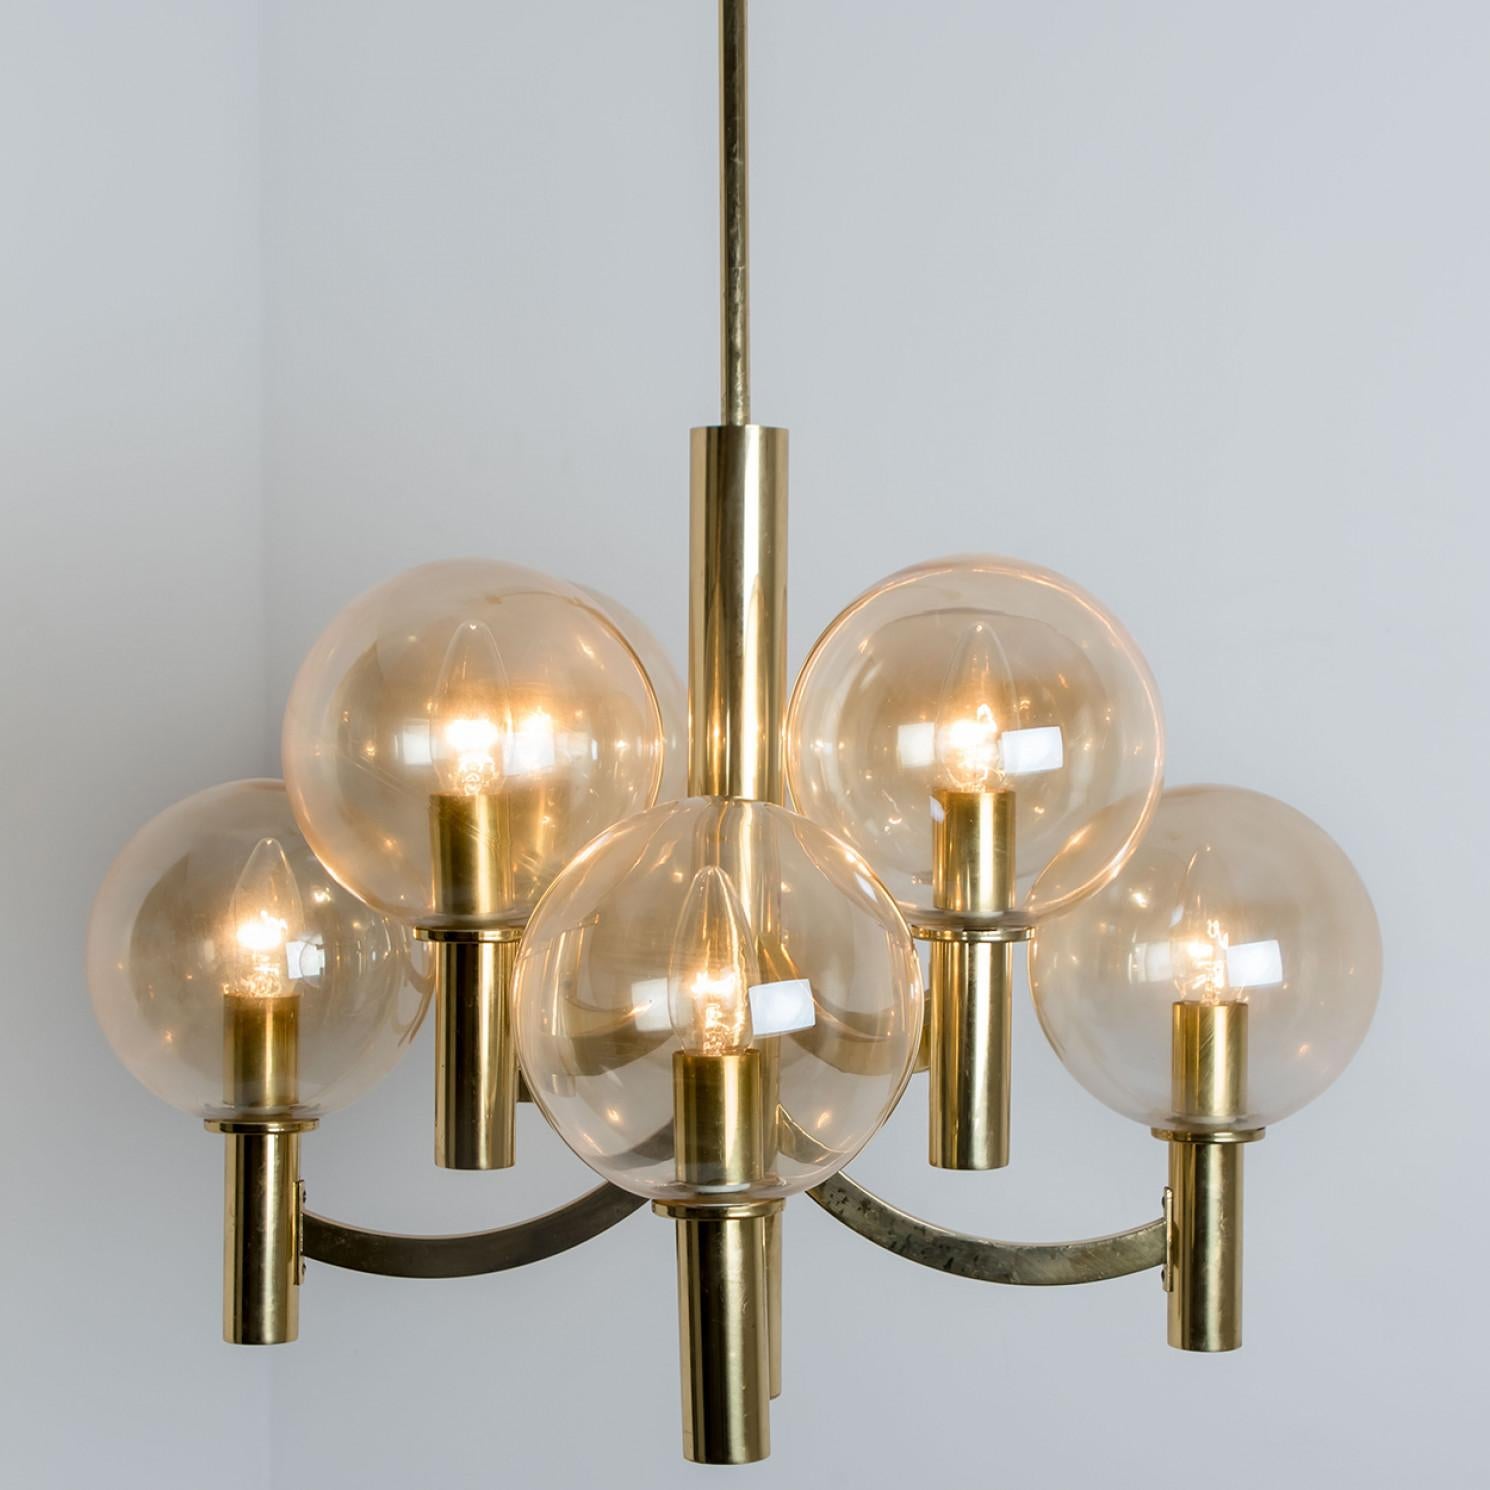 Brass and Clear Glass Chandelier, Jakobsson, 1970s For Sale 7